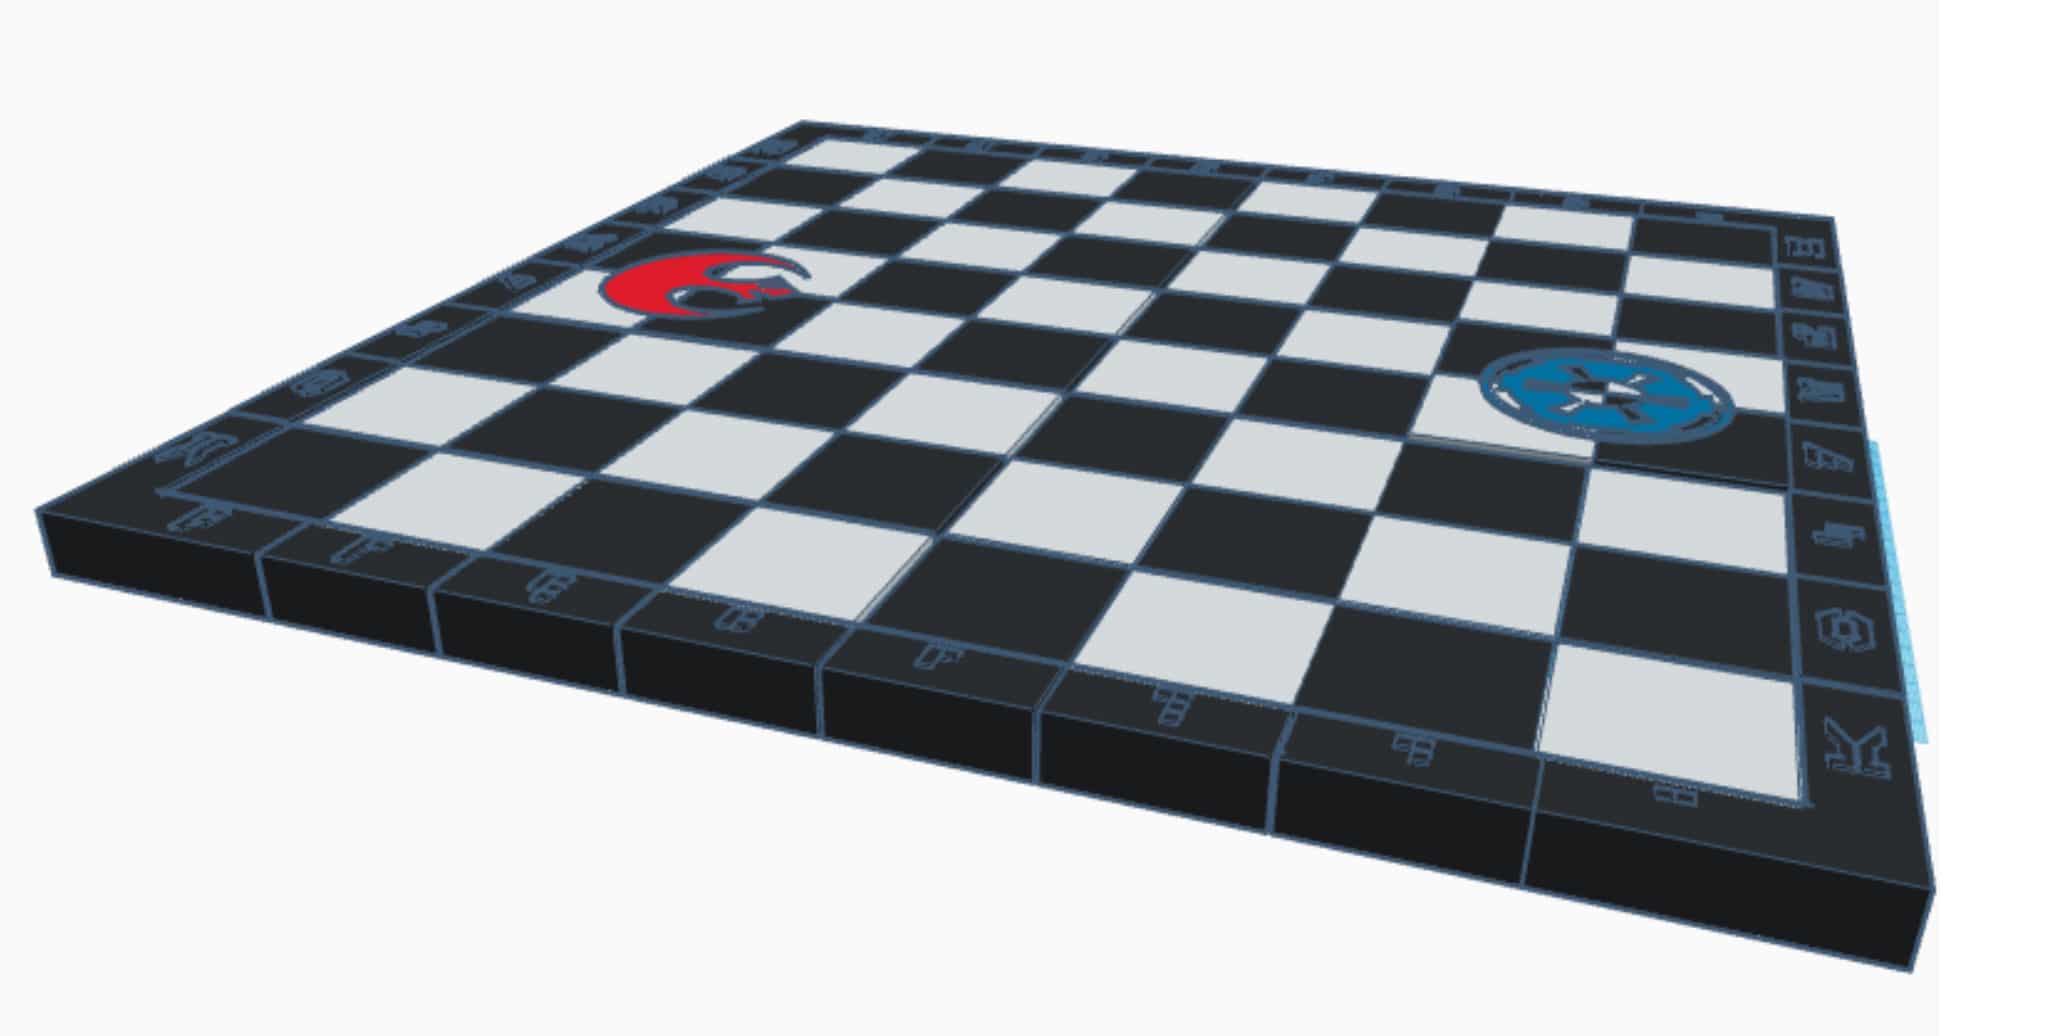 Preview of Chessboard in Tinkercad